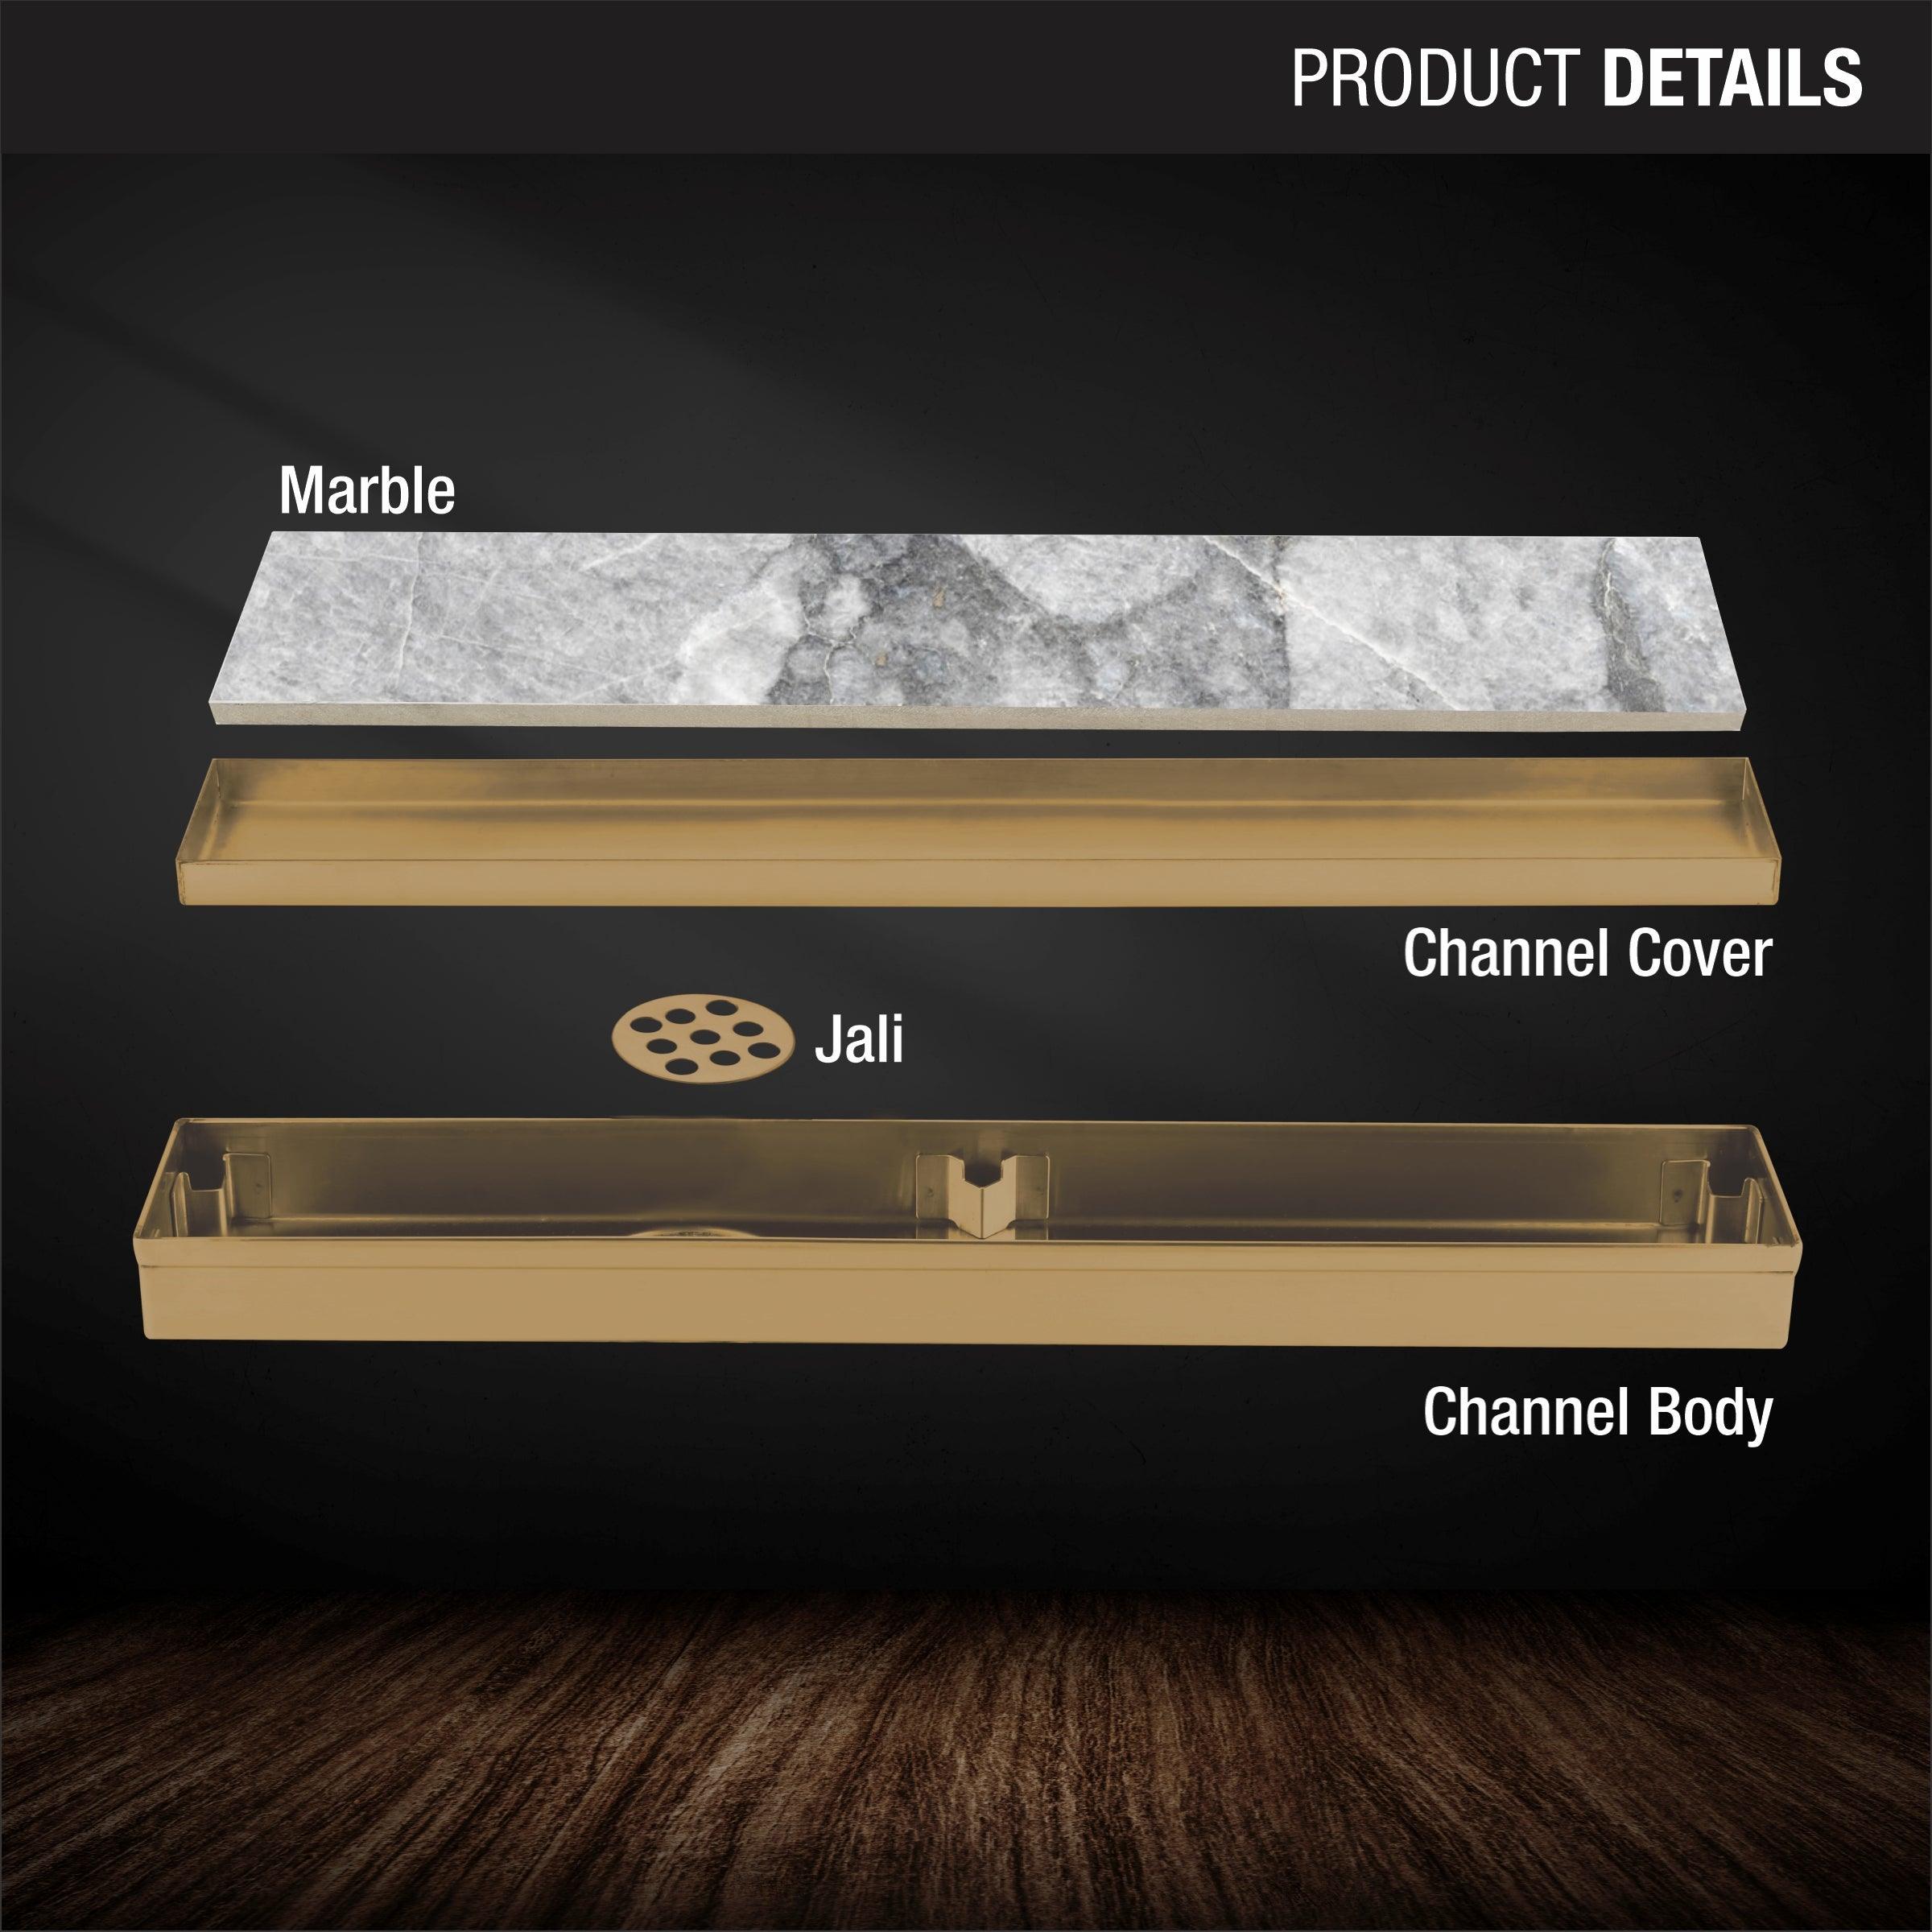 Marble Insert Shower Drain Channel - Yellow Gold (36 x 2 Inches) product details